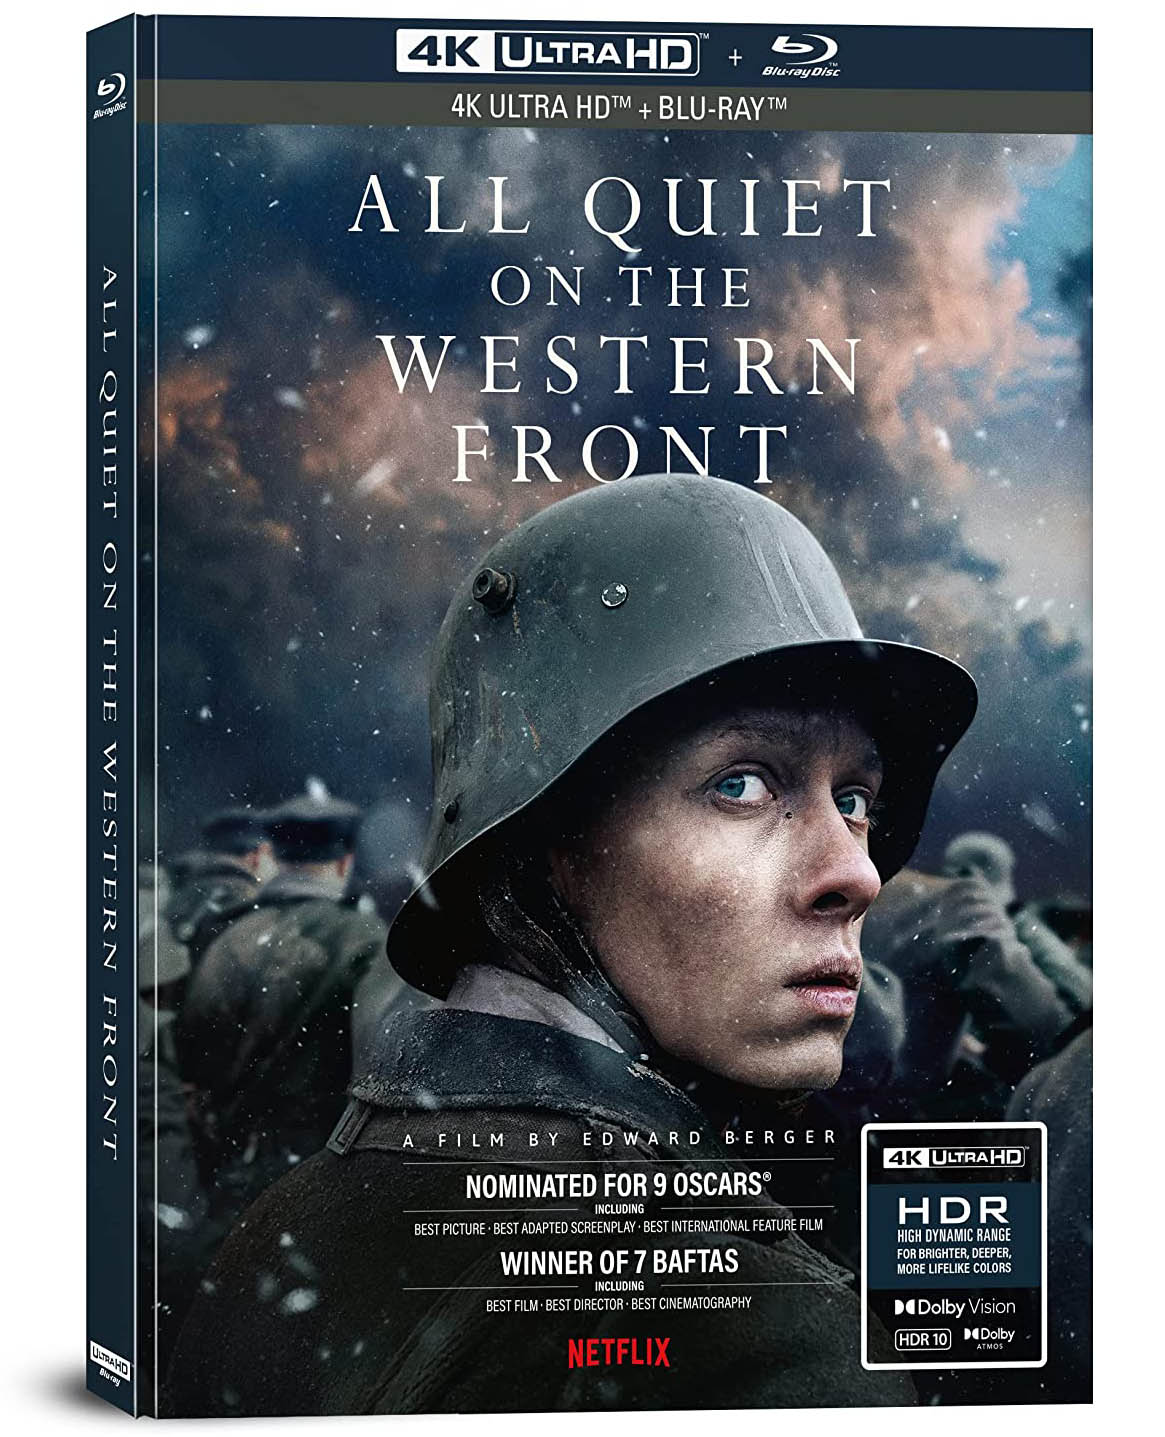 All Quiet on the Western Front 4k Blu-ray